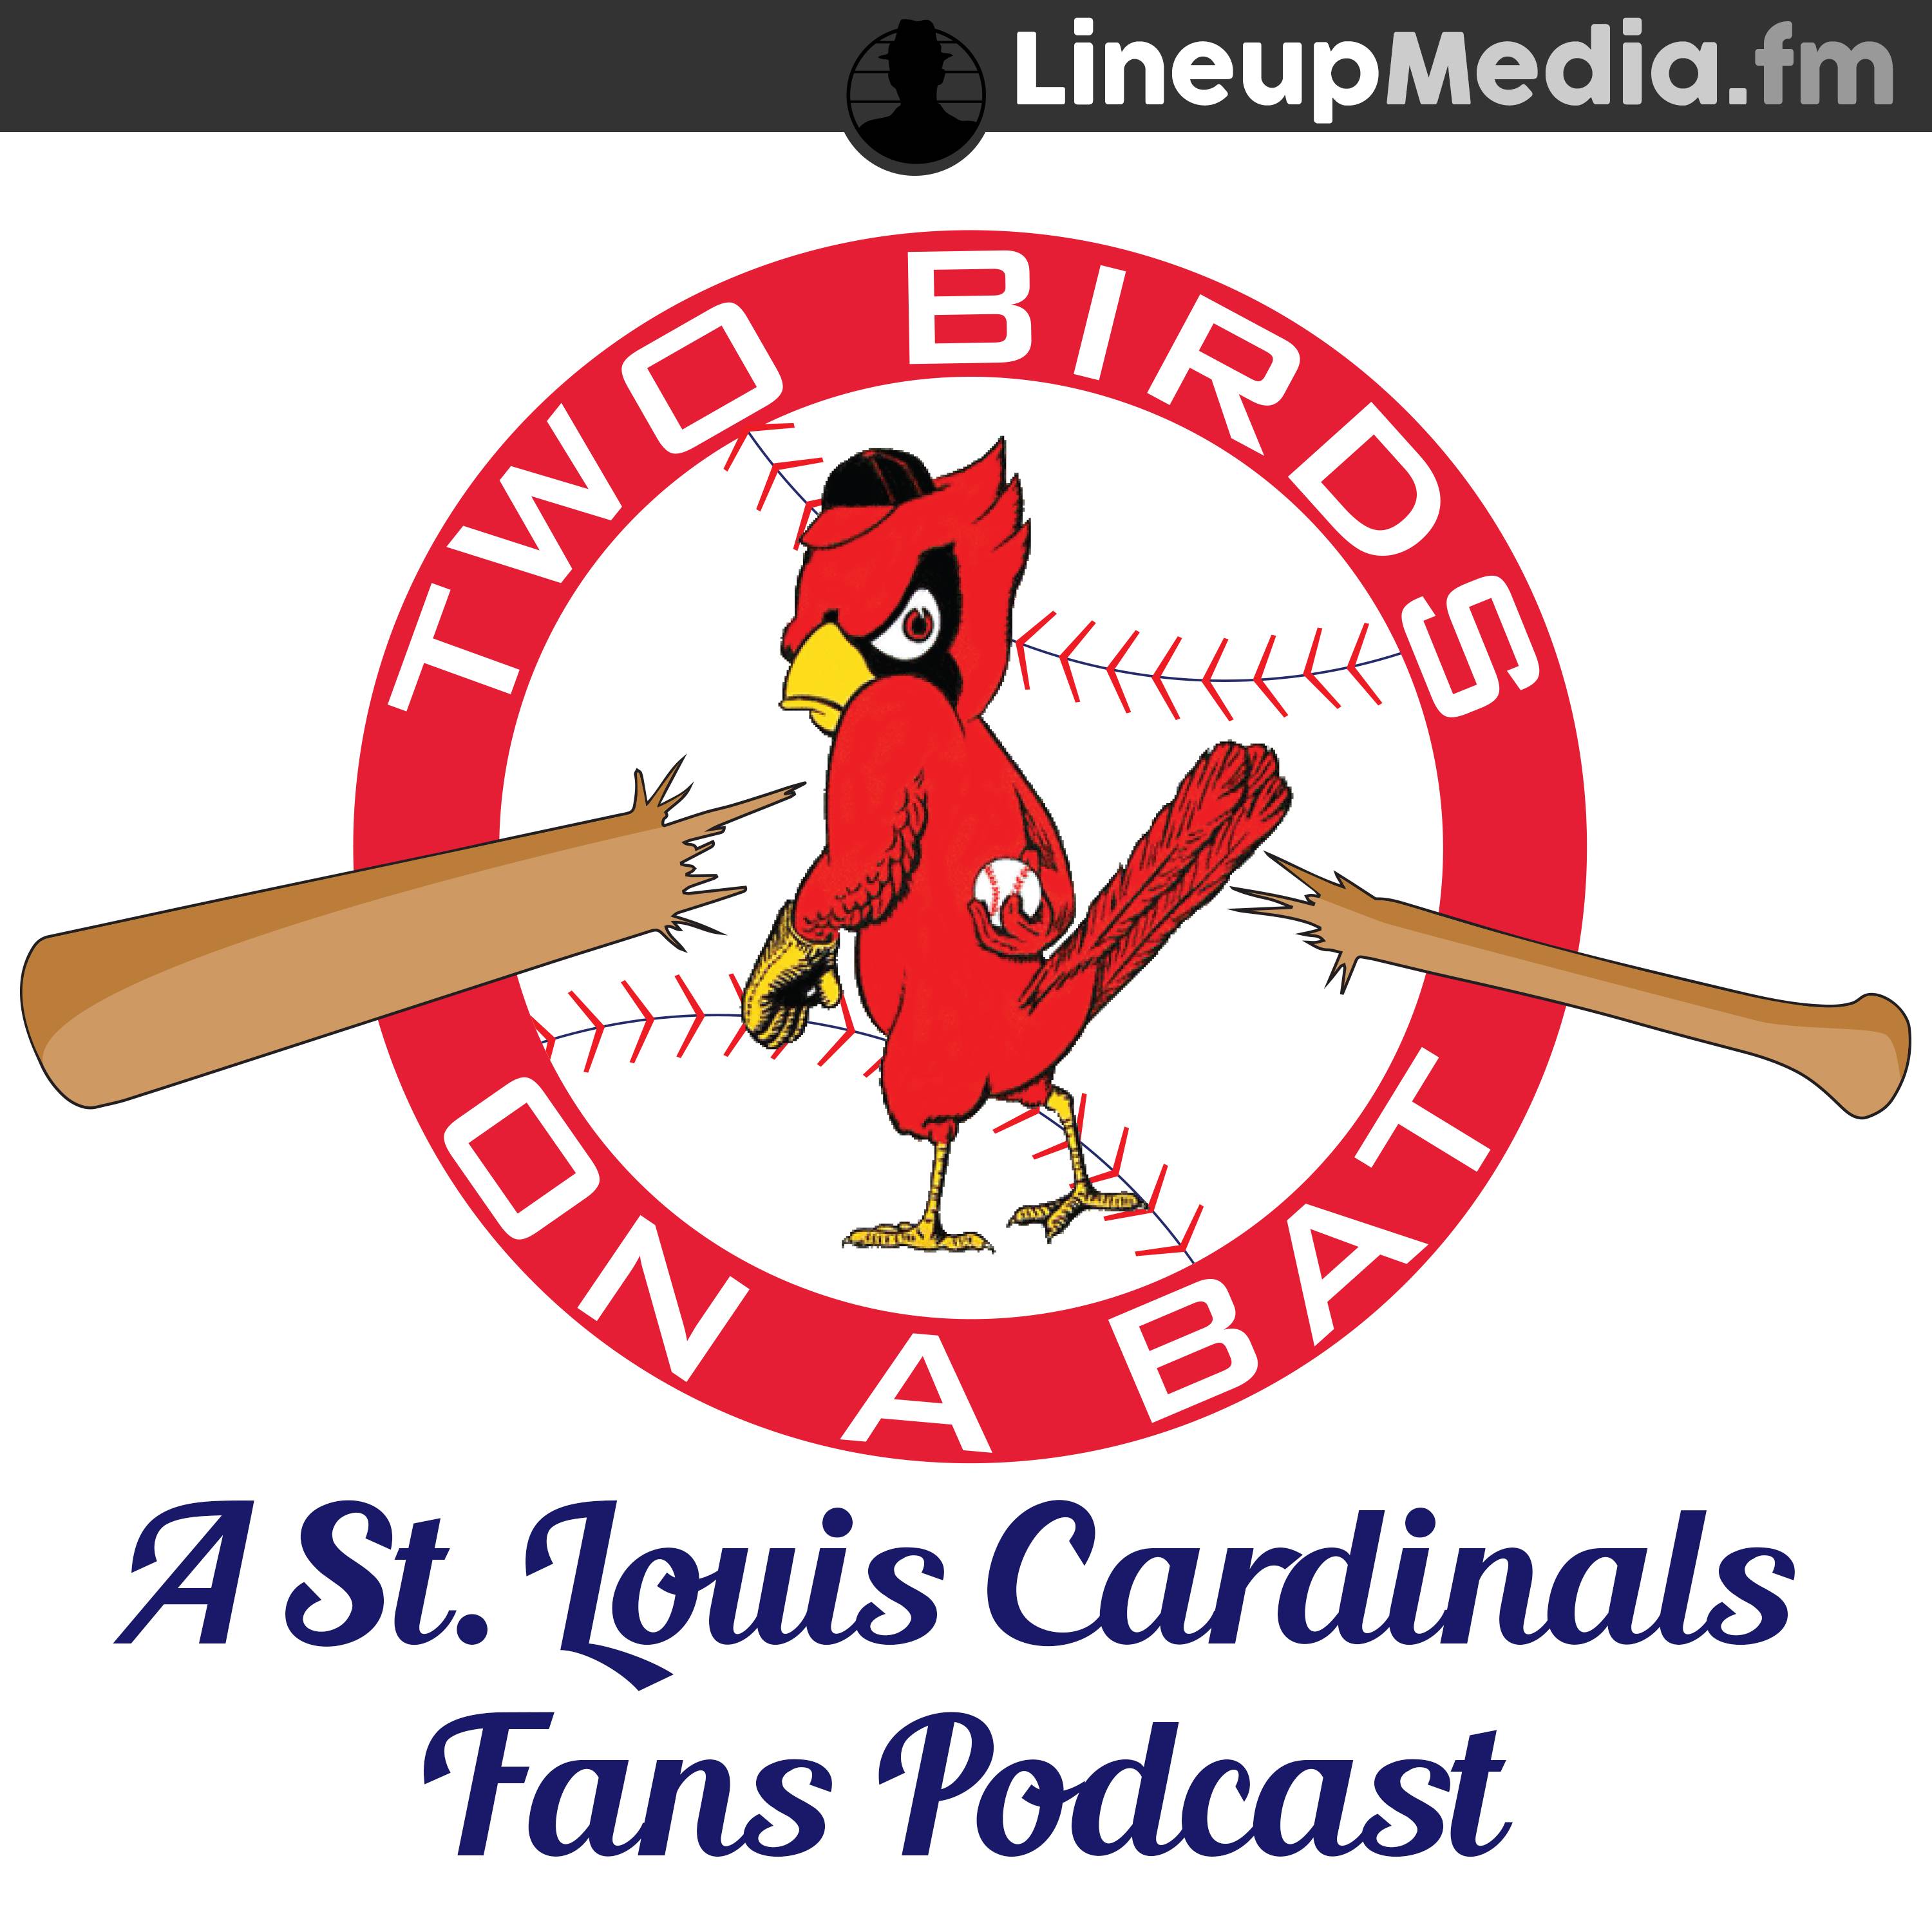 The Birds On Bat Cardinals Logo - Two Birds on a Bat - The Podcast for Cardinal Fans, by Cardinal Fans ...